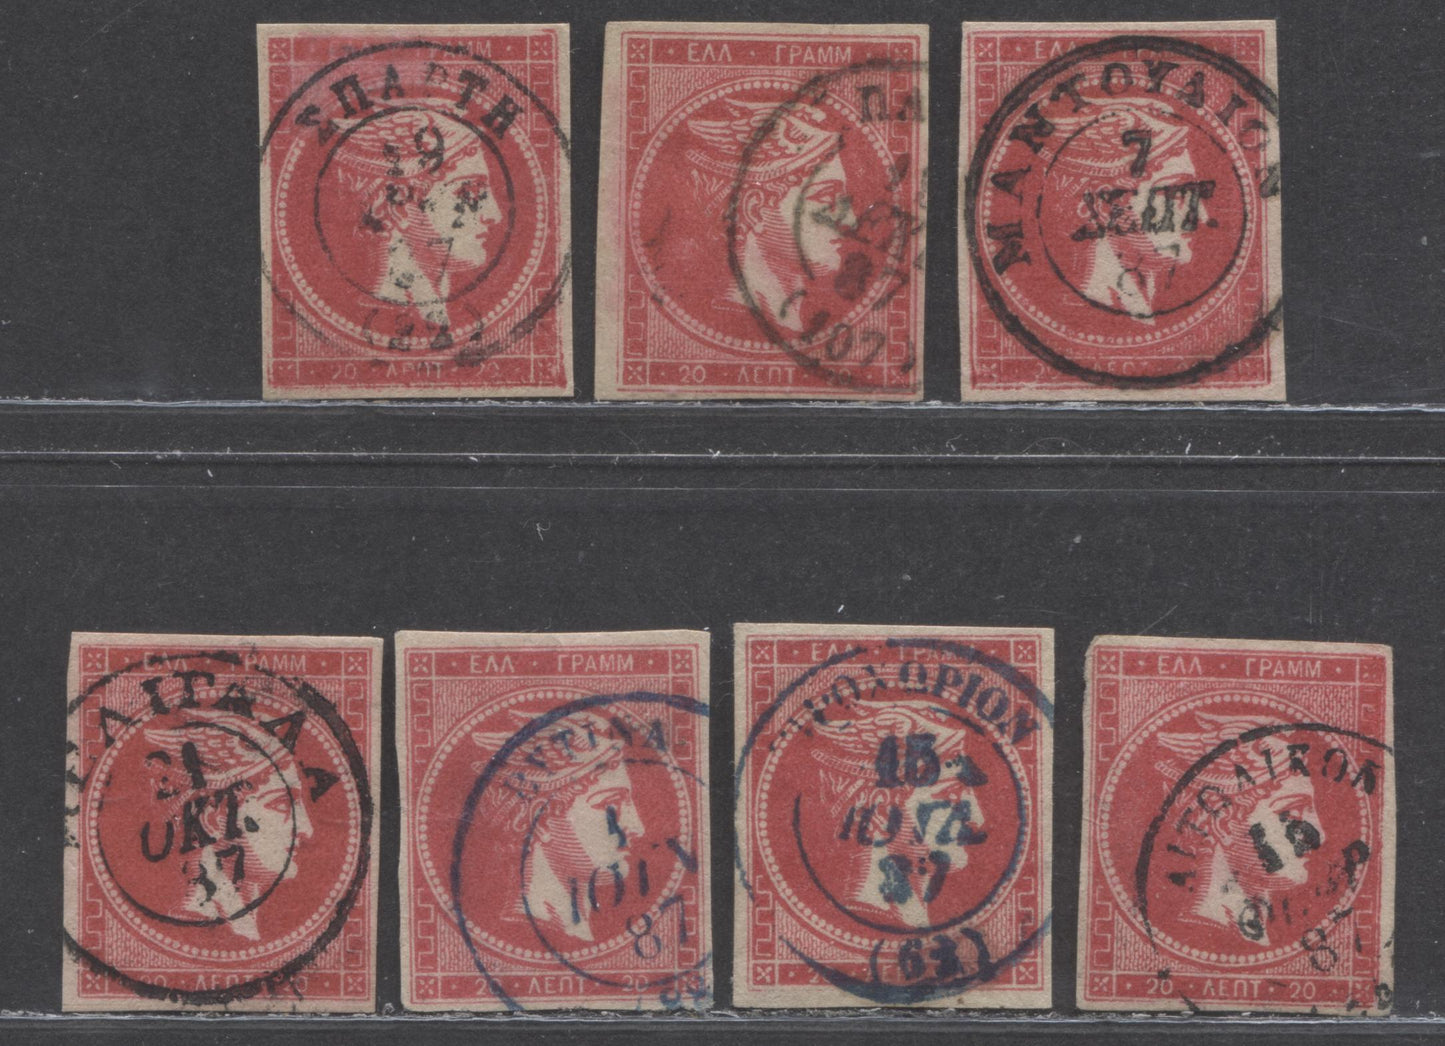 Lot 91 Greece SC#56a 20l Aniline Rose On Cream Paper, No Control Numbers 1880-1886 Large Hermes Head Issue, 1887 CDS Cancels, 7 Fine Used Examples, Click on Listing to See ALL Pictures, Estimated Value $25 USD